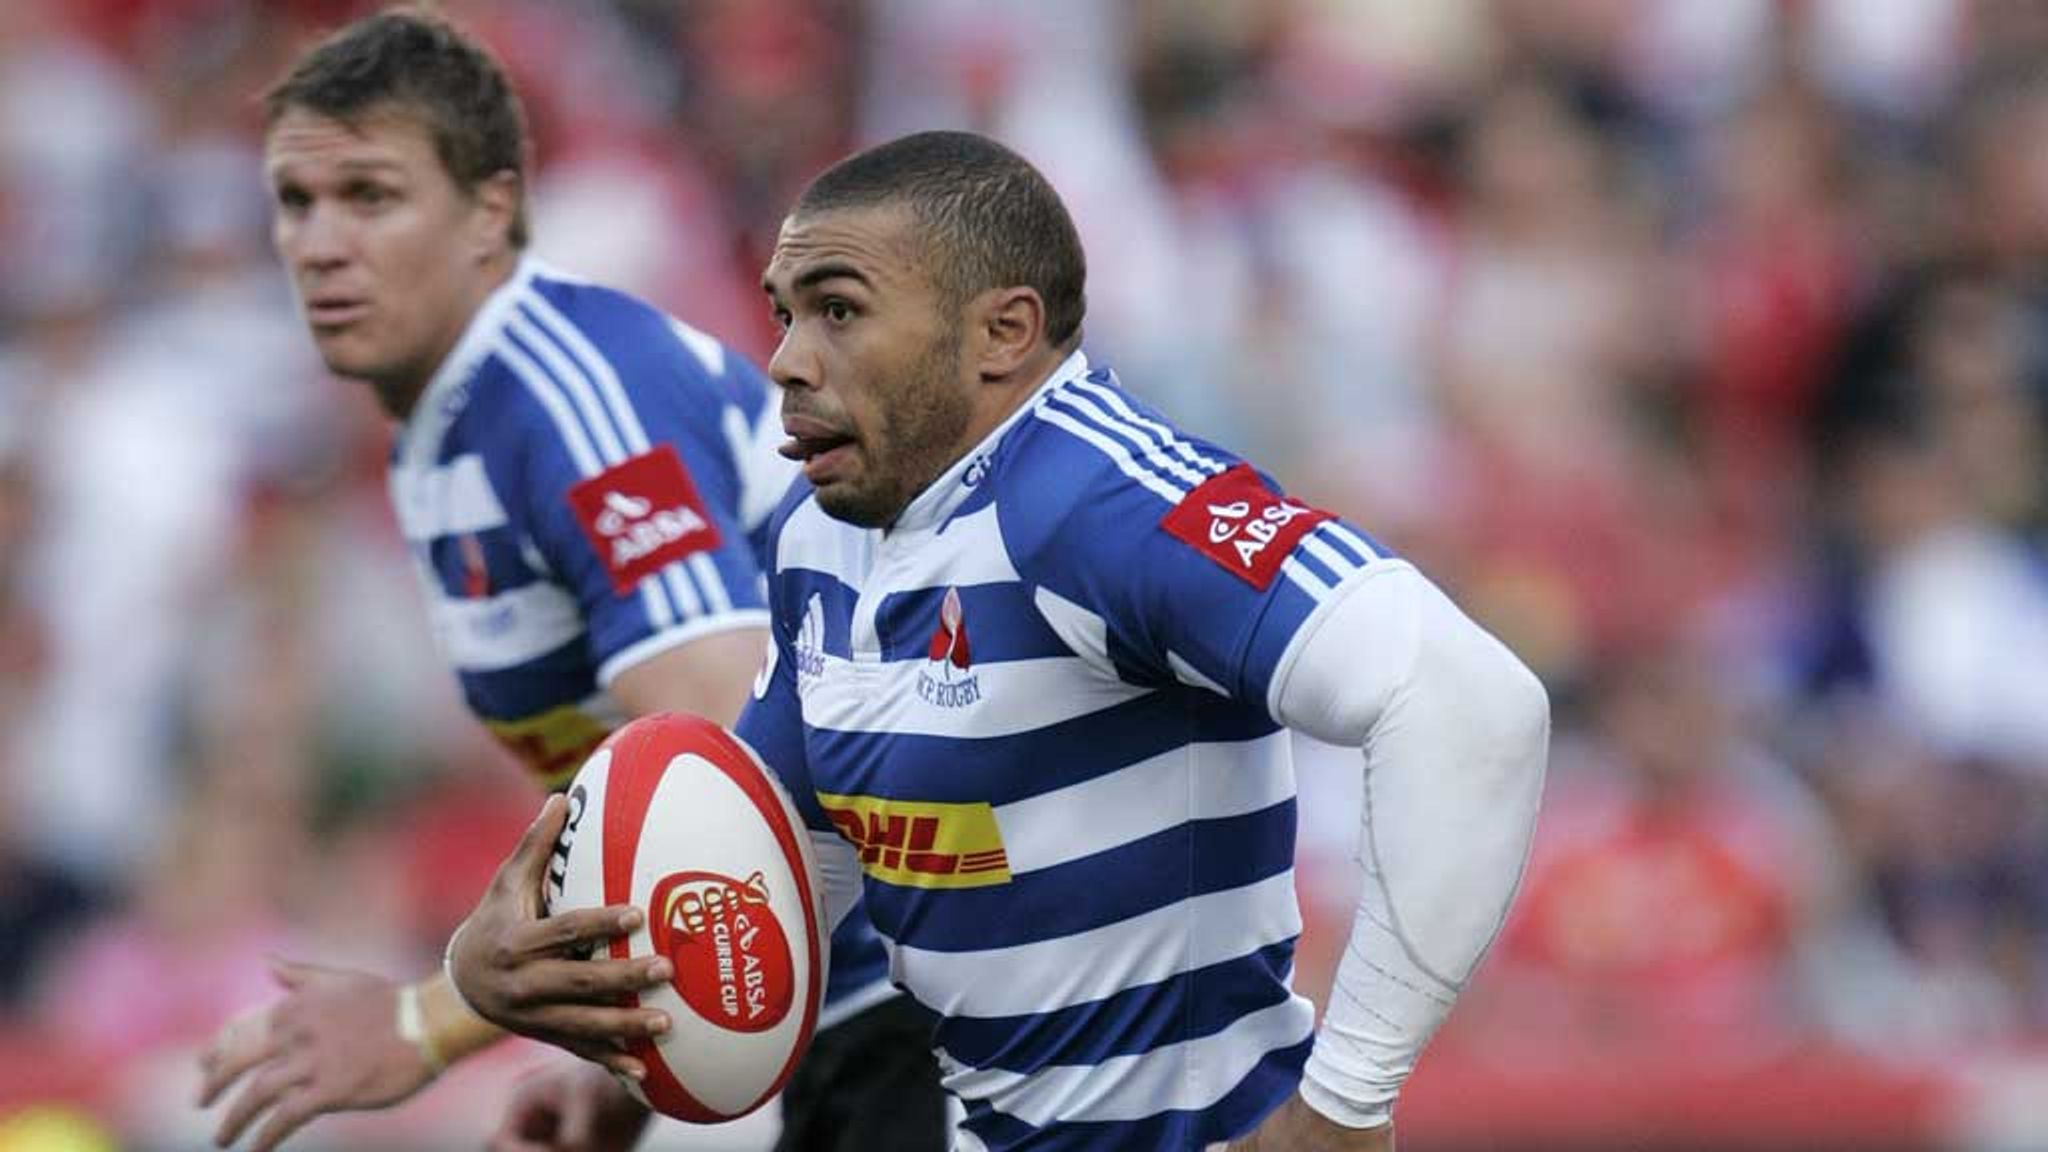 Western Province end Currie Cup wait Rugby Union News Sky Sports